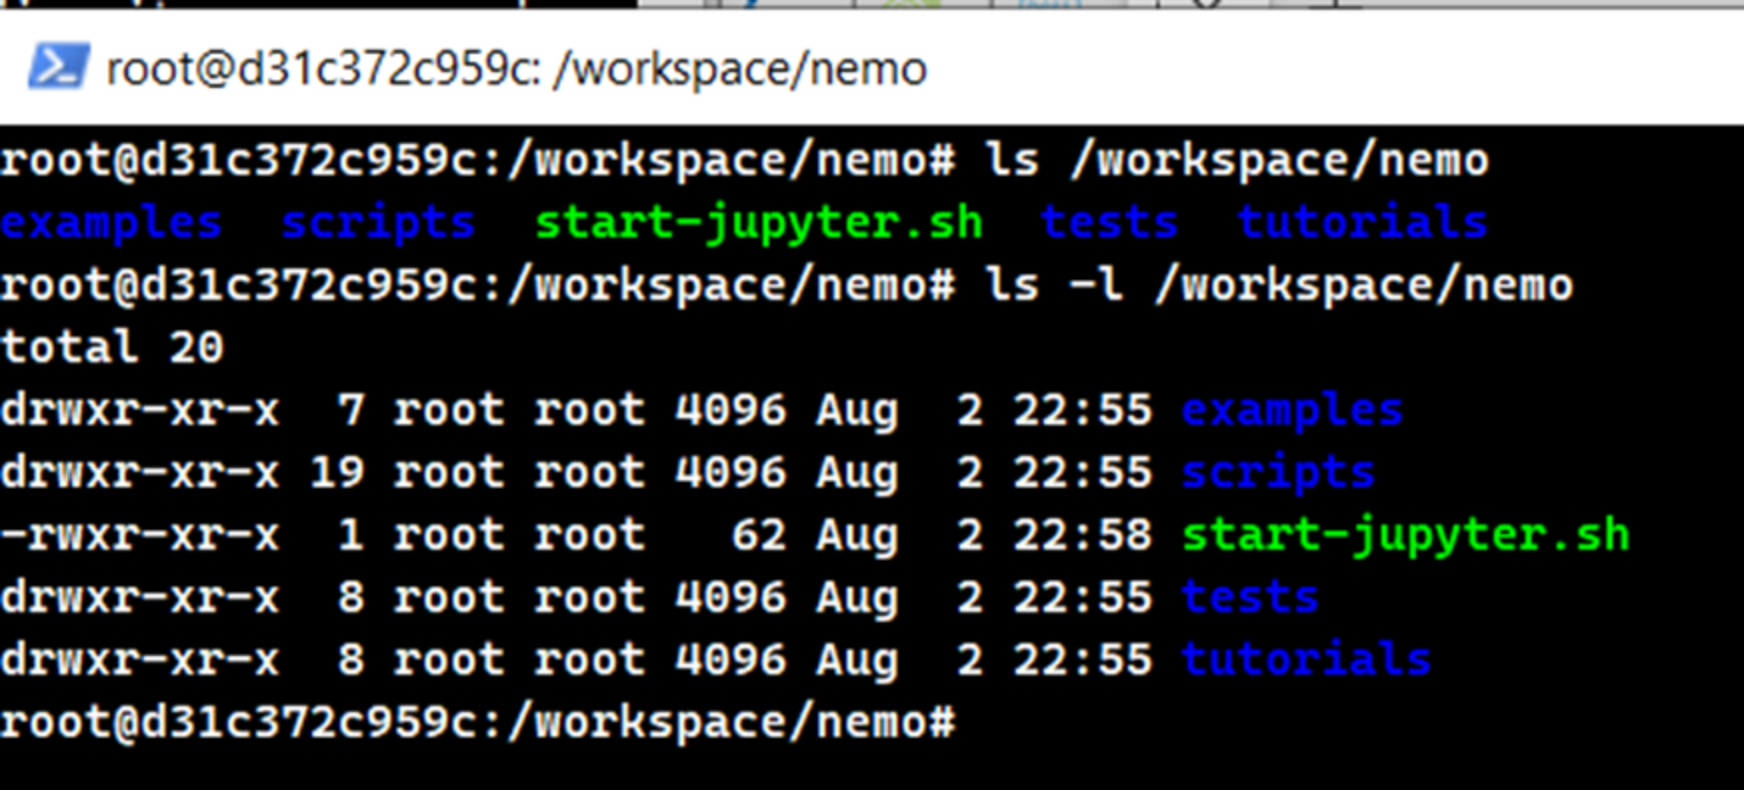 Code and output of the ls /workspace/nemo command